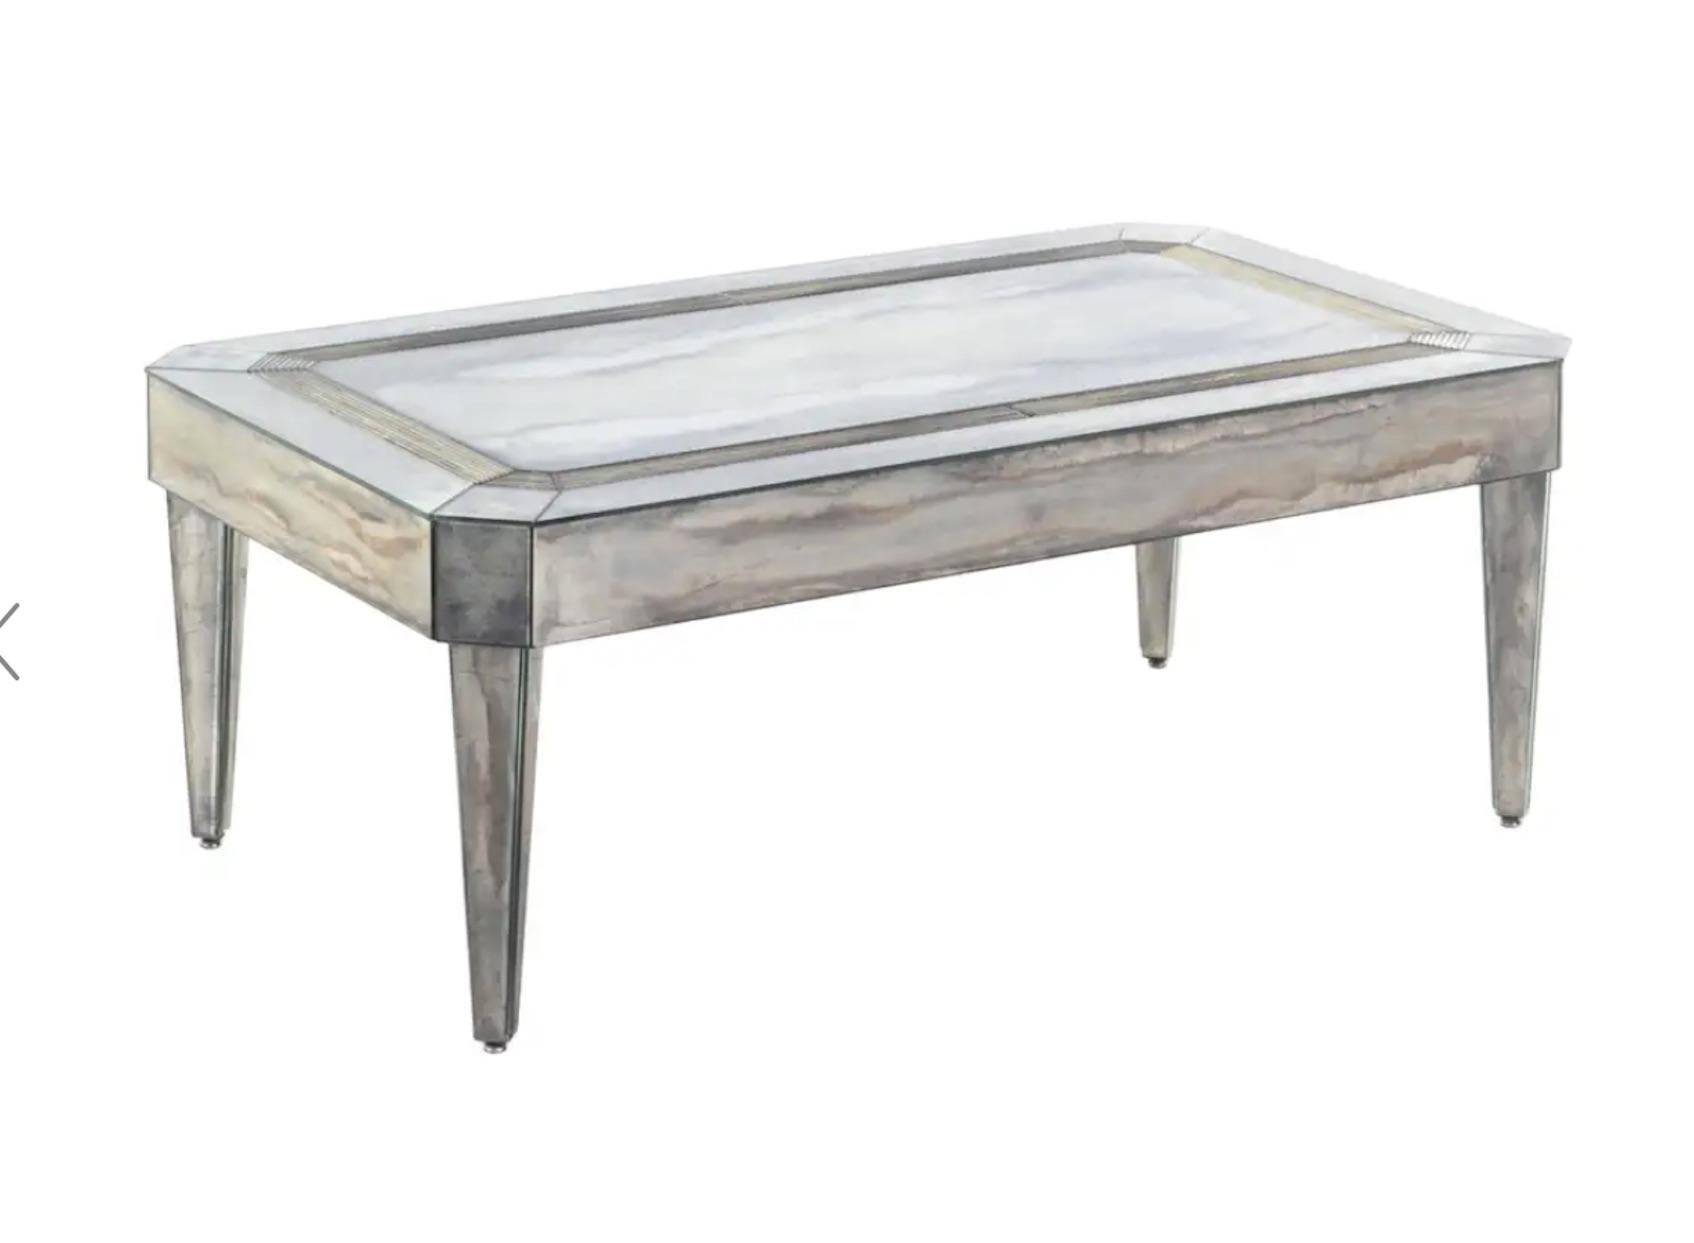 Louis XVI Style Coffee Table with Marble Top.  Lovely Old Worn Patina/Finish. 2